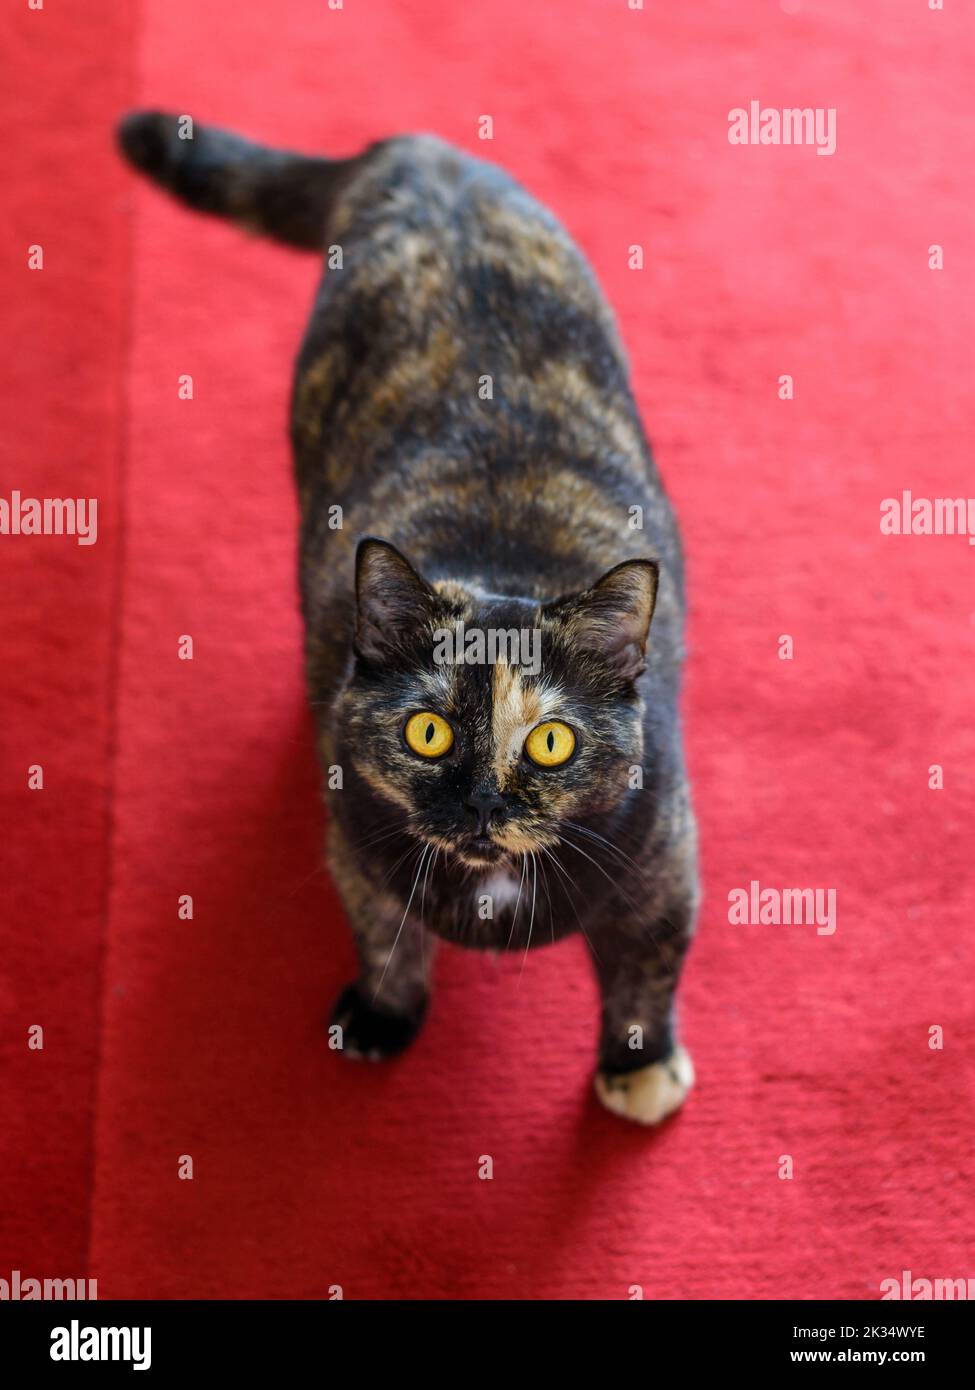 British Shorthair domestic cat on a red carpet staring at us with its big yellow eyes. Cat taken from above. Stock Photo